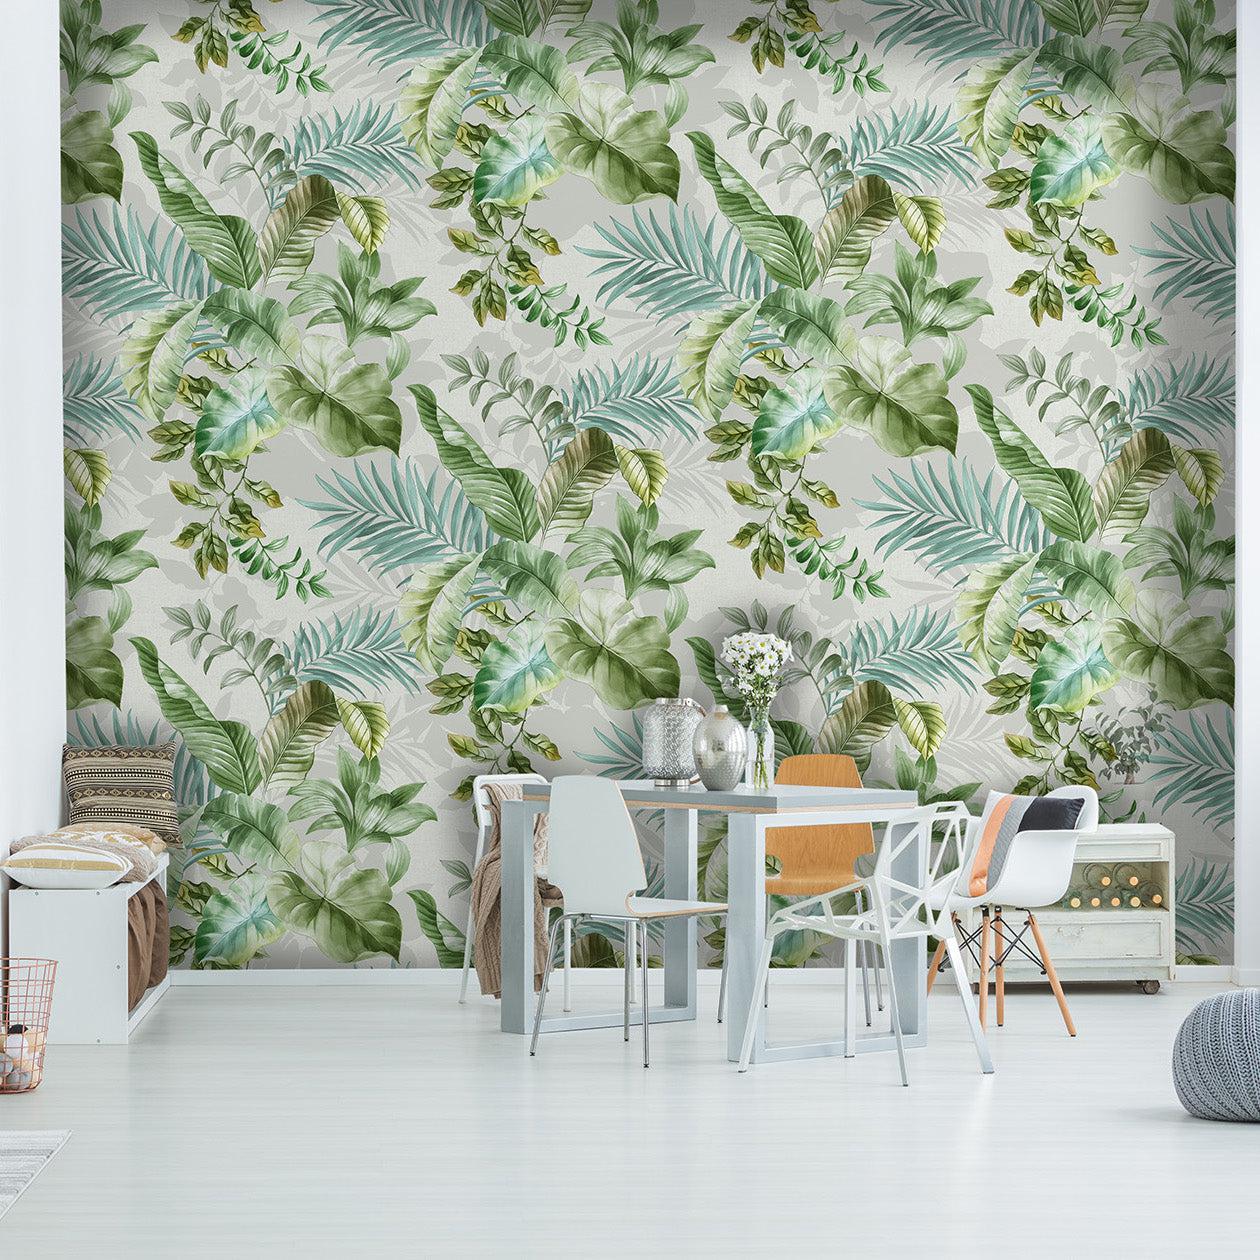 Sweet Jungle Mural Wallpaper (m²)-Wall Decor-FLORAL WALLPAPERS, LEAF WALLPAPER, MURALS / WALLPAPERS, TROPICAL MURAL-Forest Homes-Nature inspired decor-Nature decor